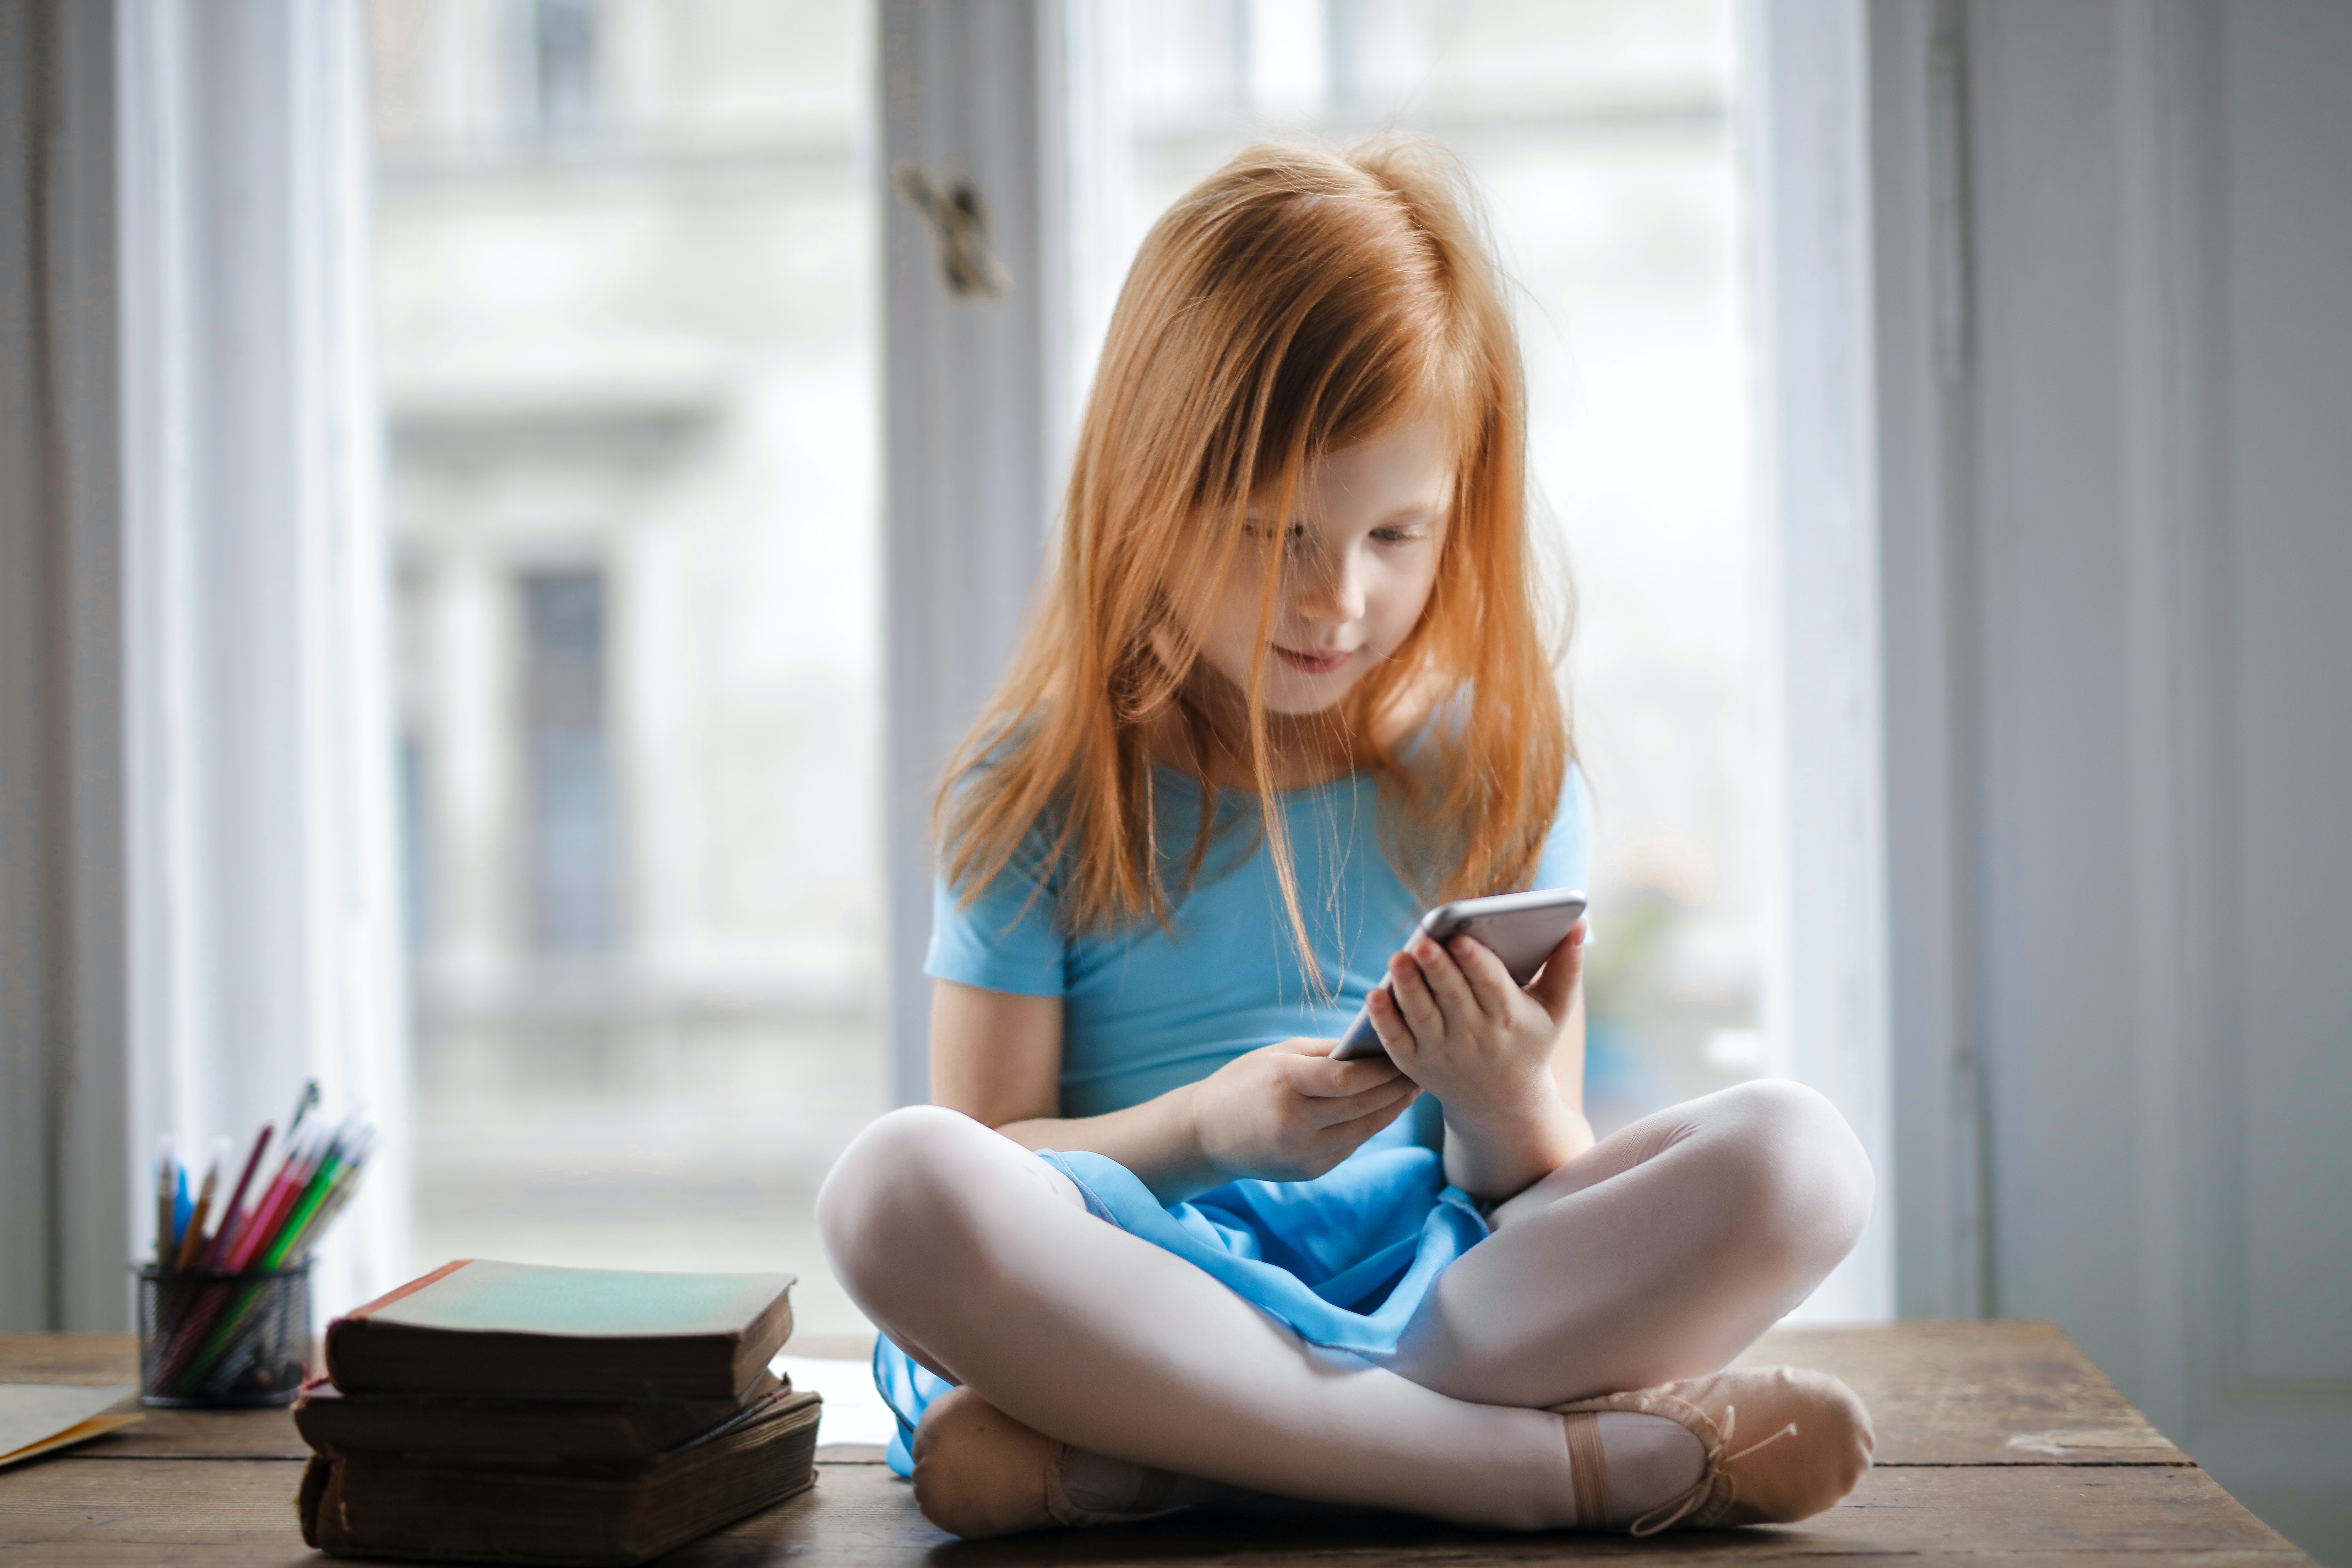 A young girl sitting on the floor, using an iPhone. 